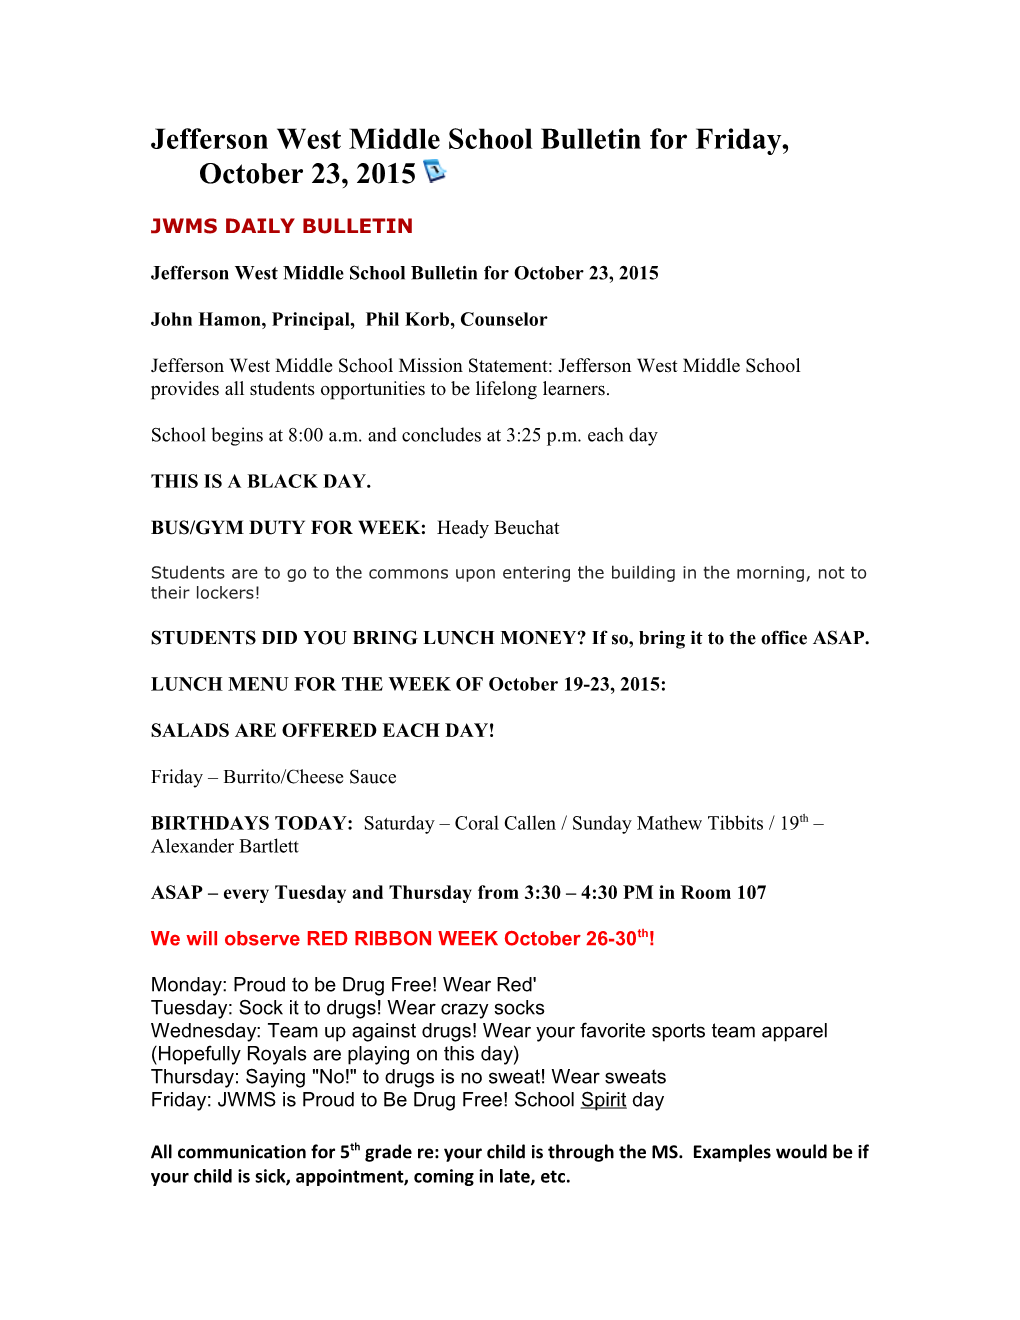 Jwms Daily Bulletin s2